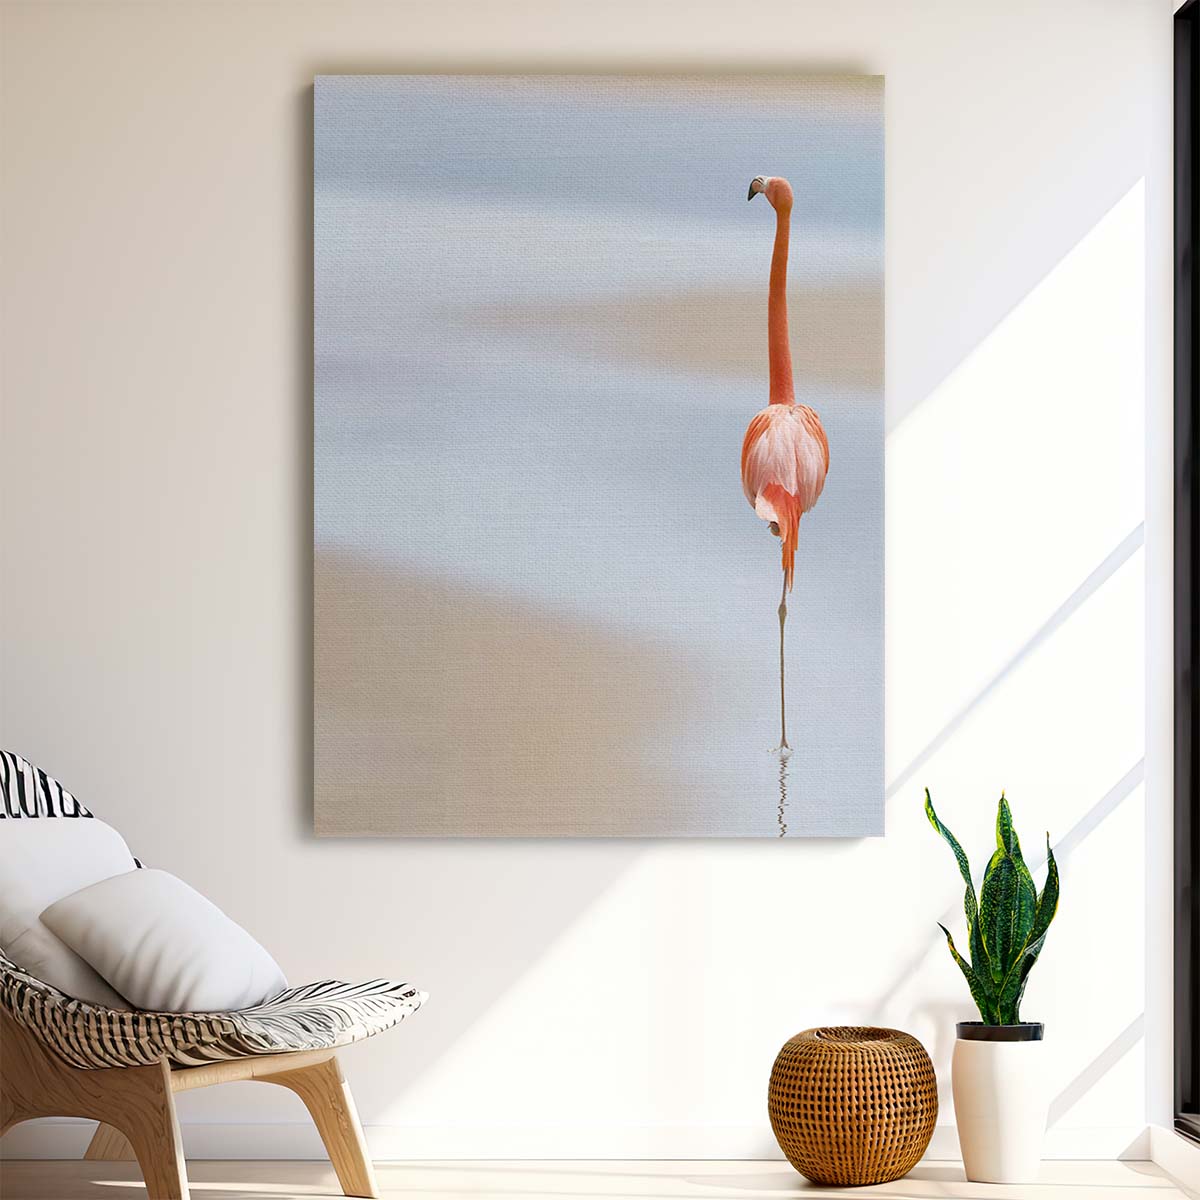 Minimalistic Red Flamingo Wildlife Photography, Coastal Beach Landscape by Luxuriance Designs, made in USA